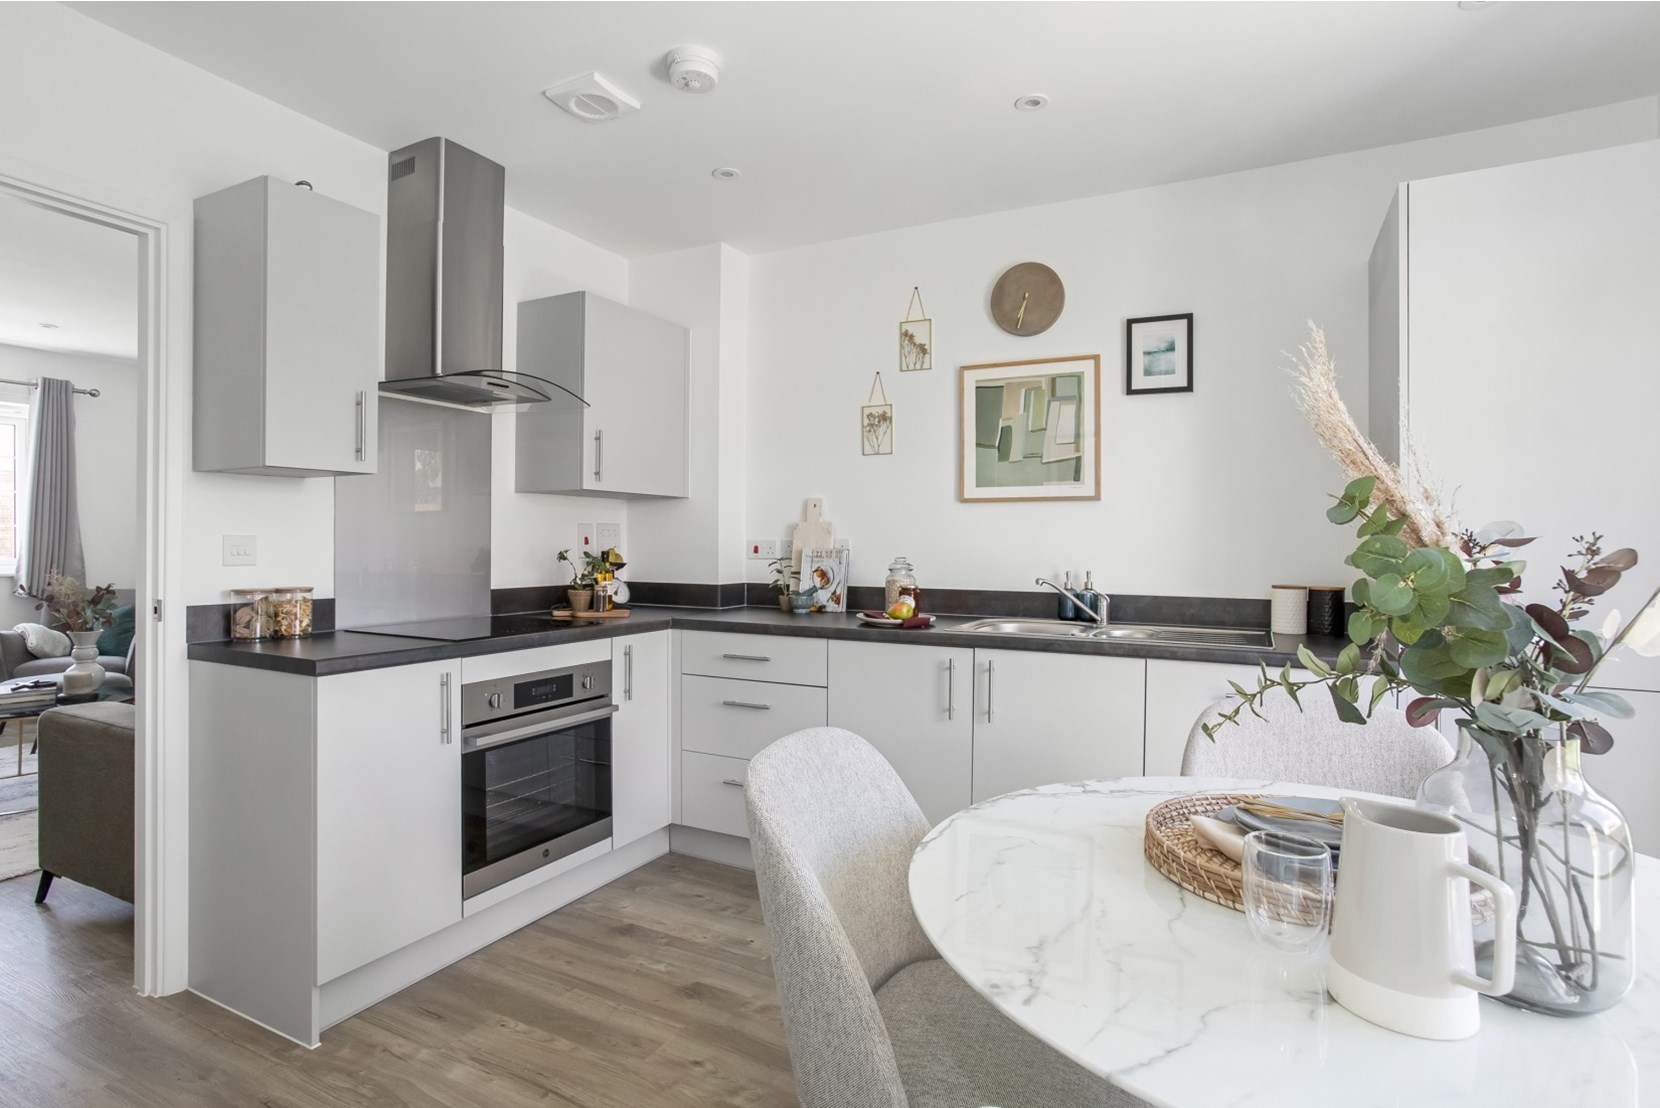 Homes to Rent by Allsop at Spinning Fields, Braintree, Essex, CM7, kitchen dining area